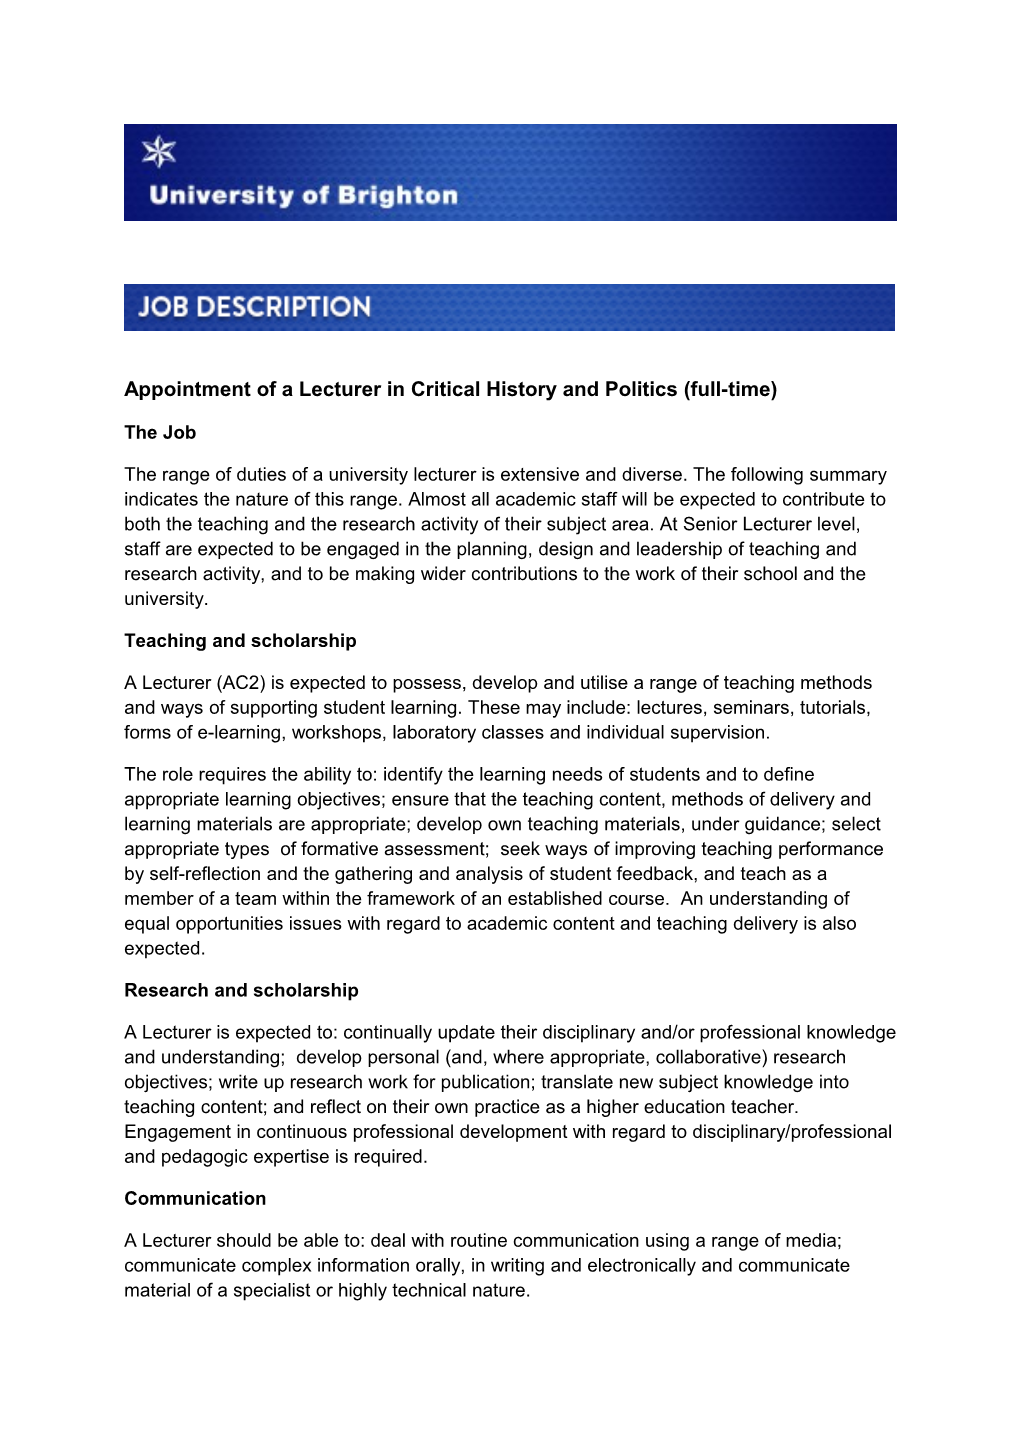 Appointment of a Lecturerin Critical History and Politics (Full-Time)